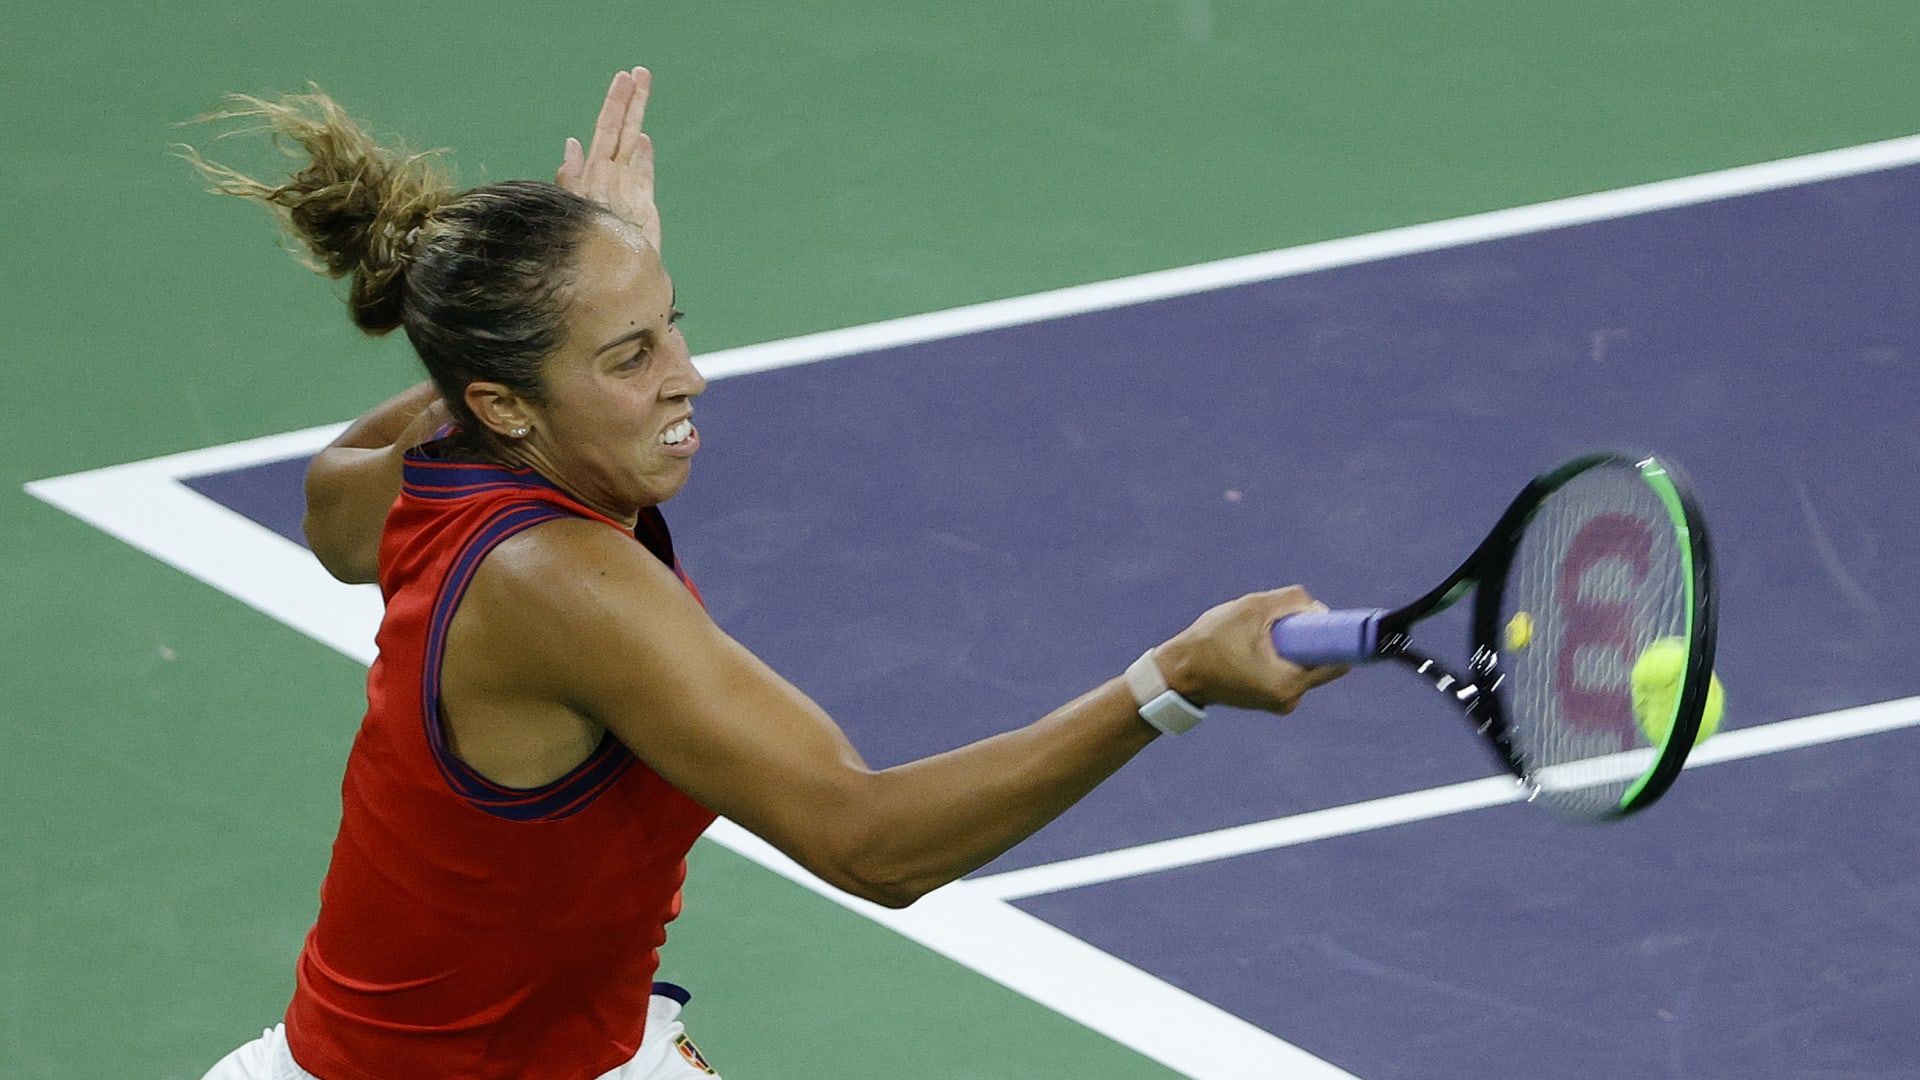 Madison Keys wins first match since Wimbledon over Kaia Kanepi in Indian Wells first round